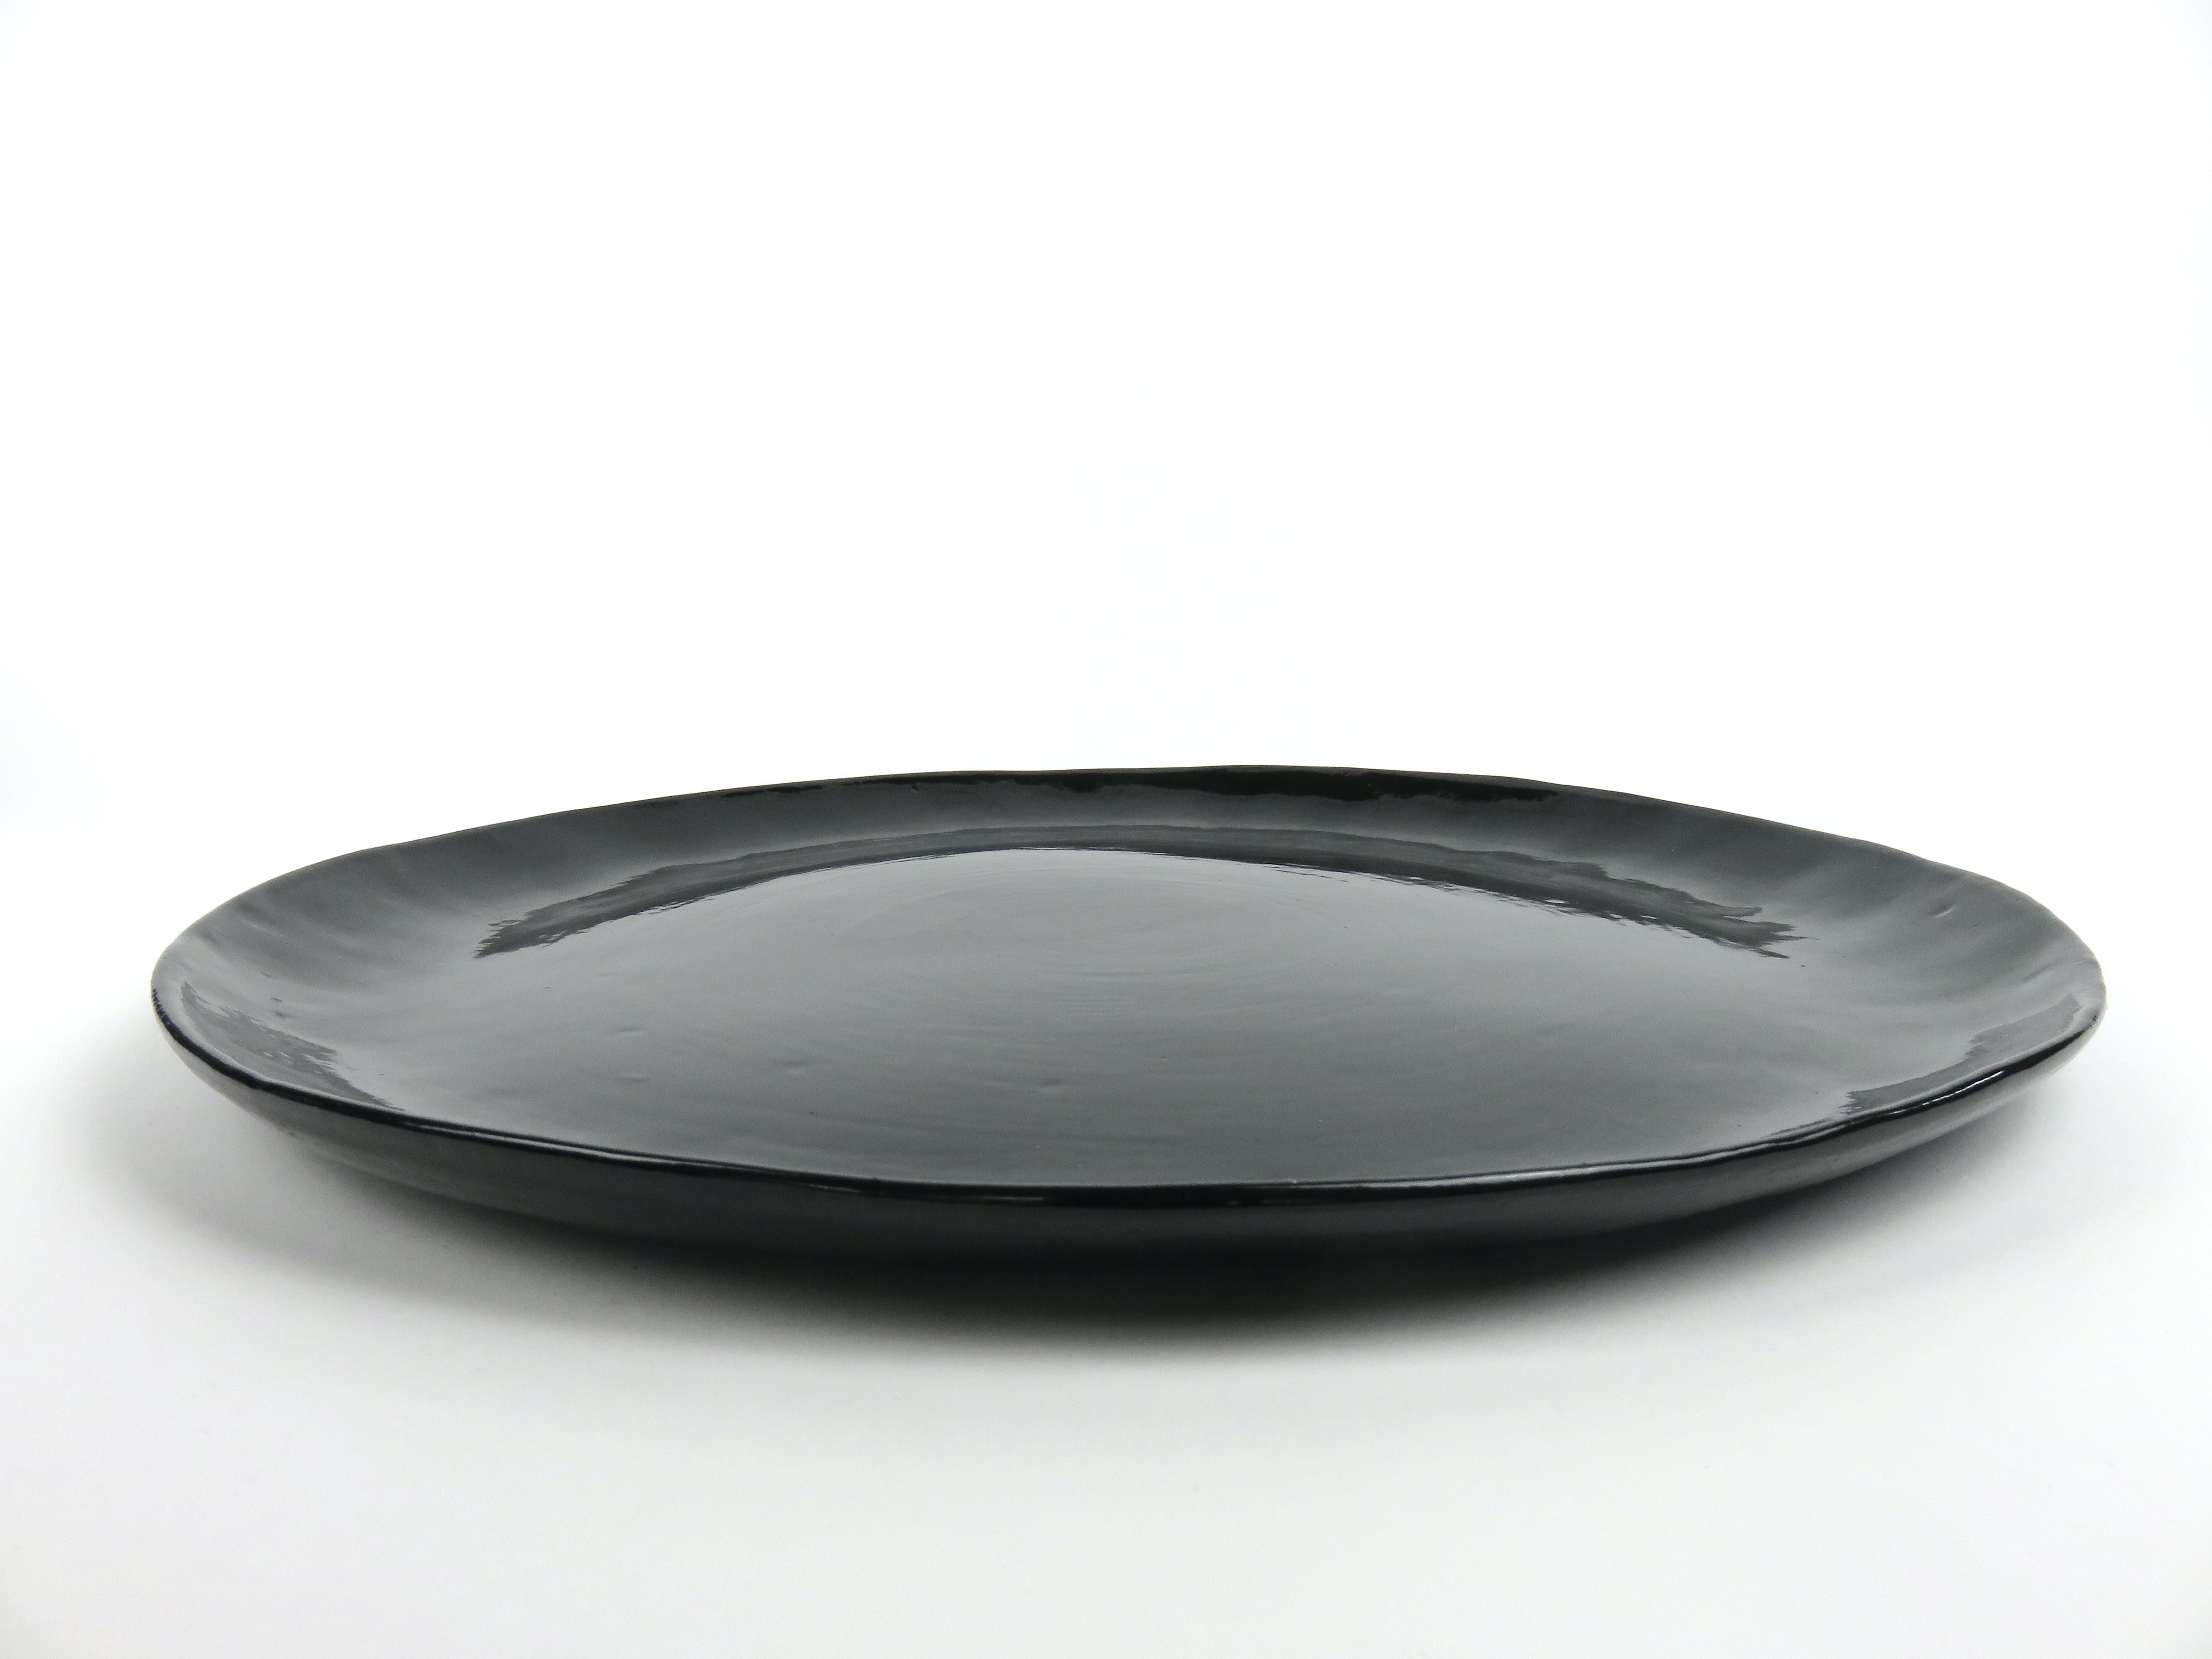 Large Hand Built Ceramic Platter in Black Gloss Glaze In New Condition For Sale In New York, NY